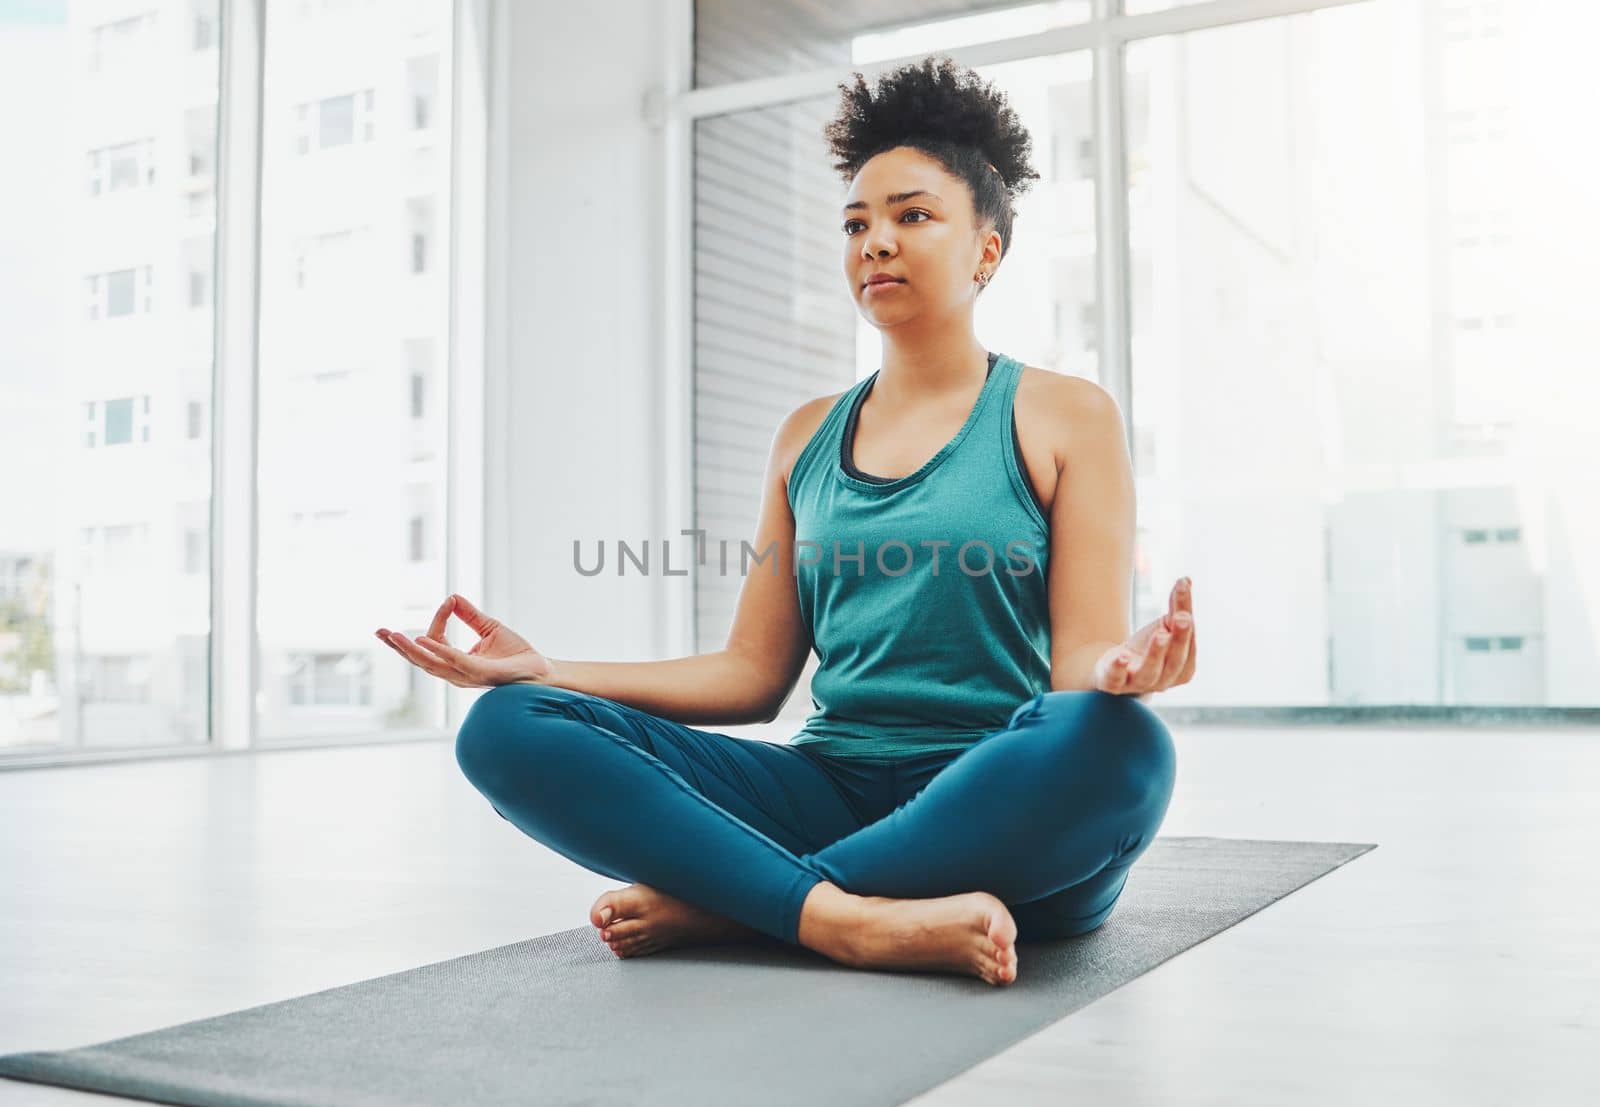 Yoga, black woman and meditation with lotus exercise for fitness, peace and wellness. Young person in health studio for holistic workout, mental health and body balance with zen energy to relax.